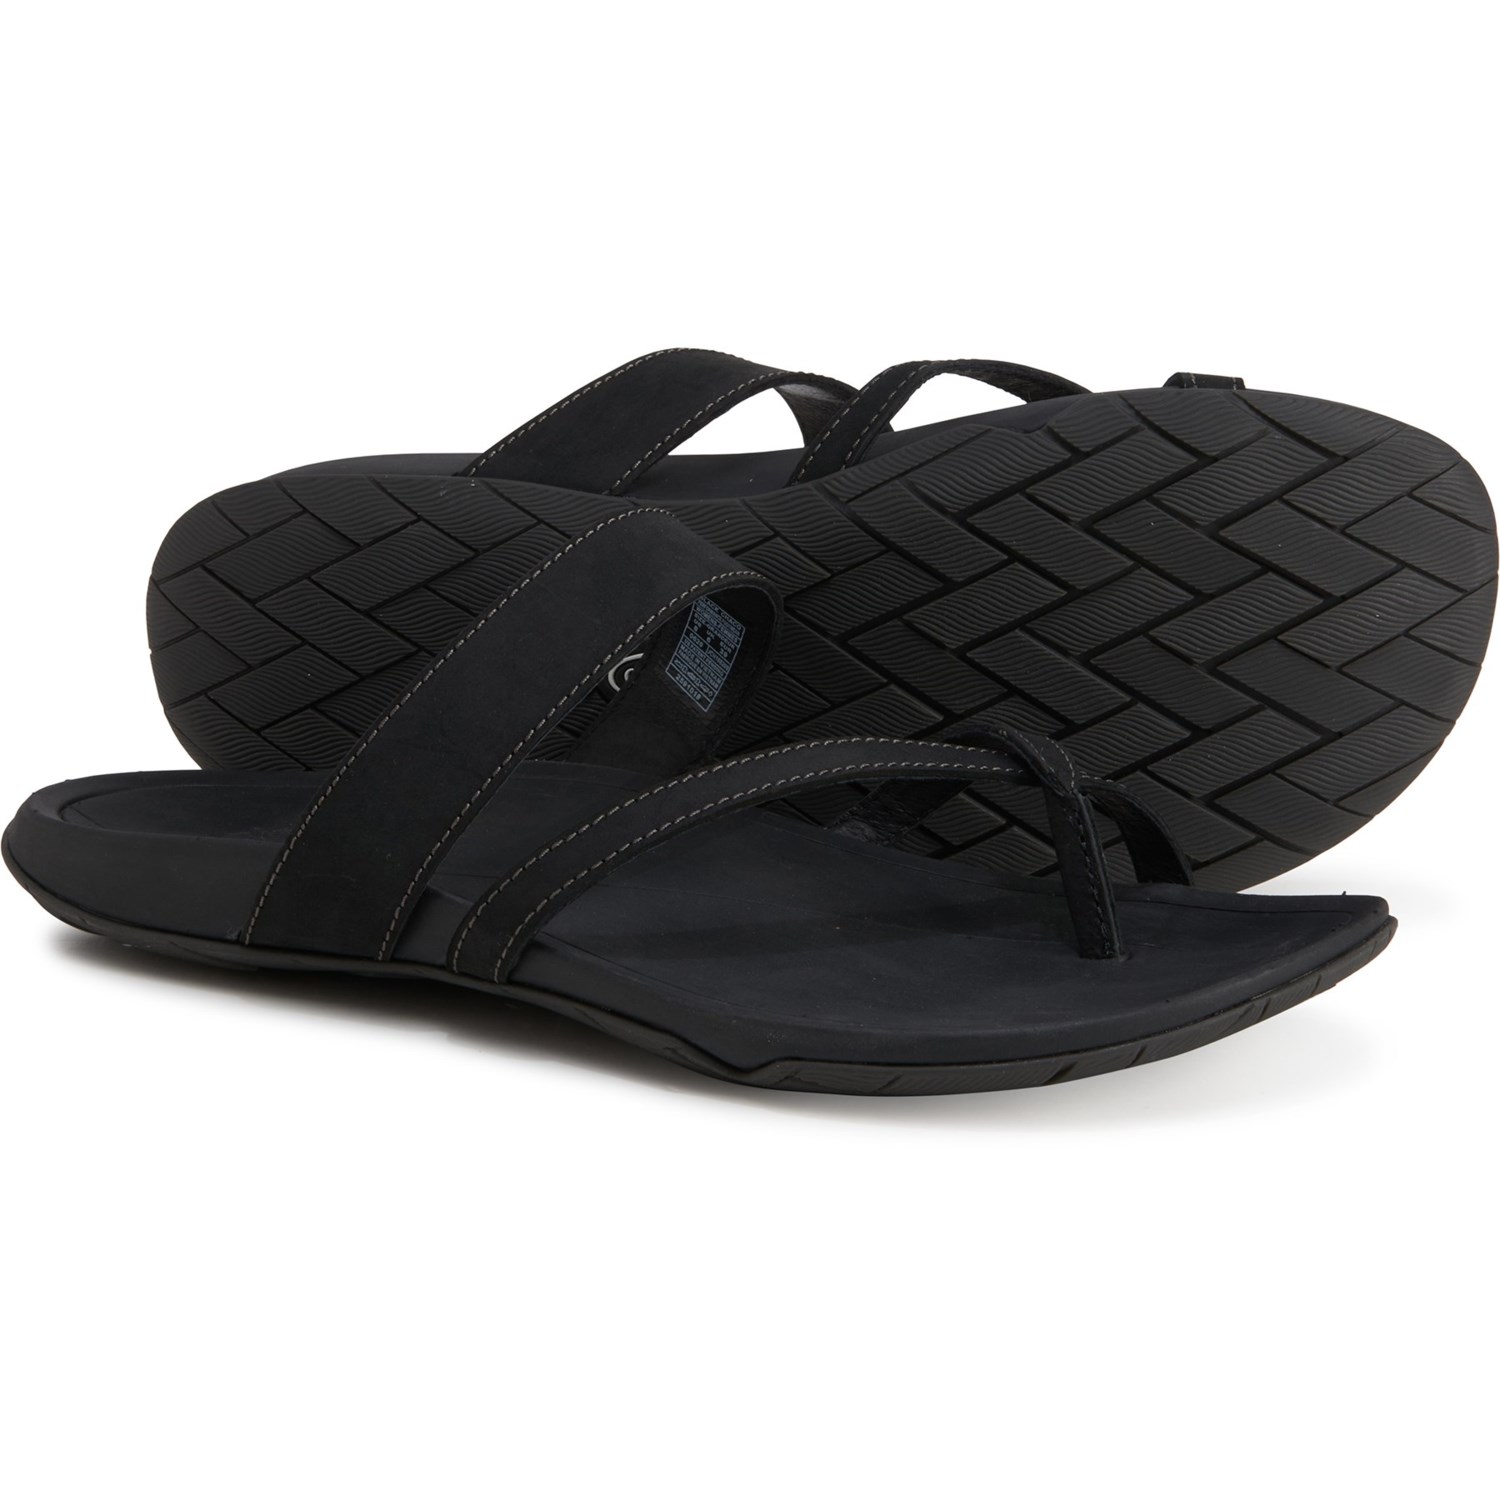 Chaco Lost Coast Sandals (For Women) - Save 63%